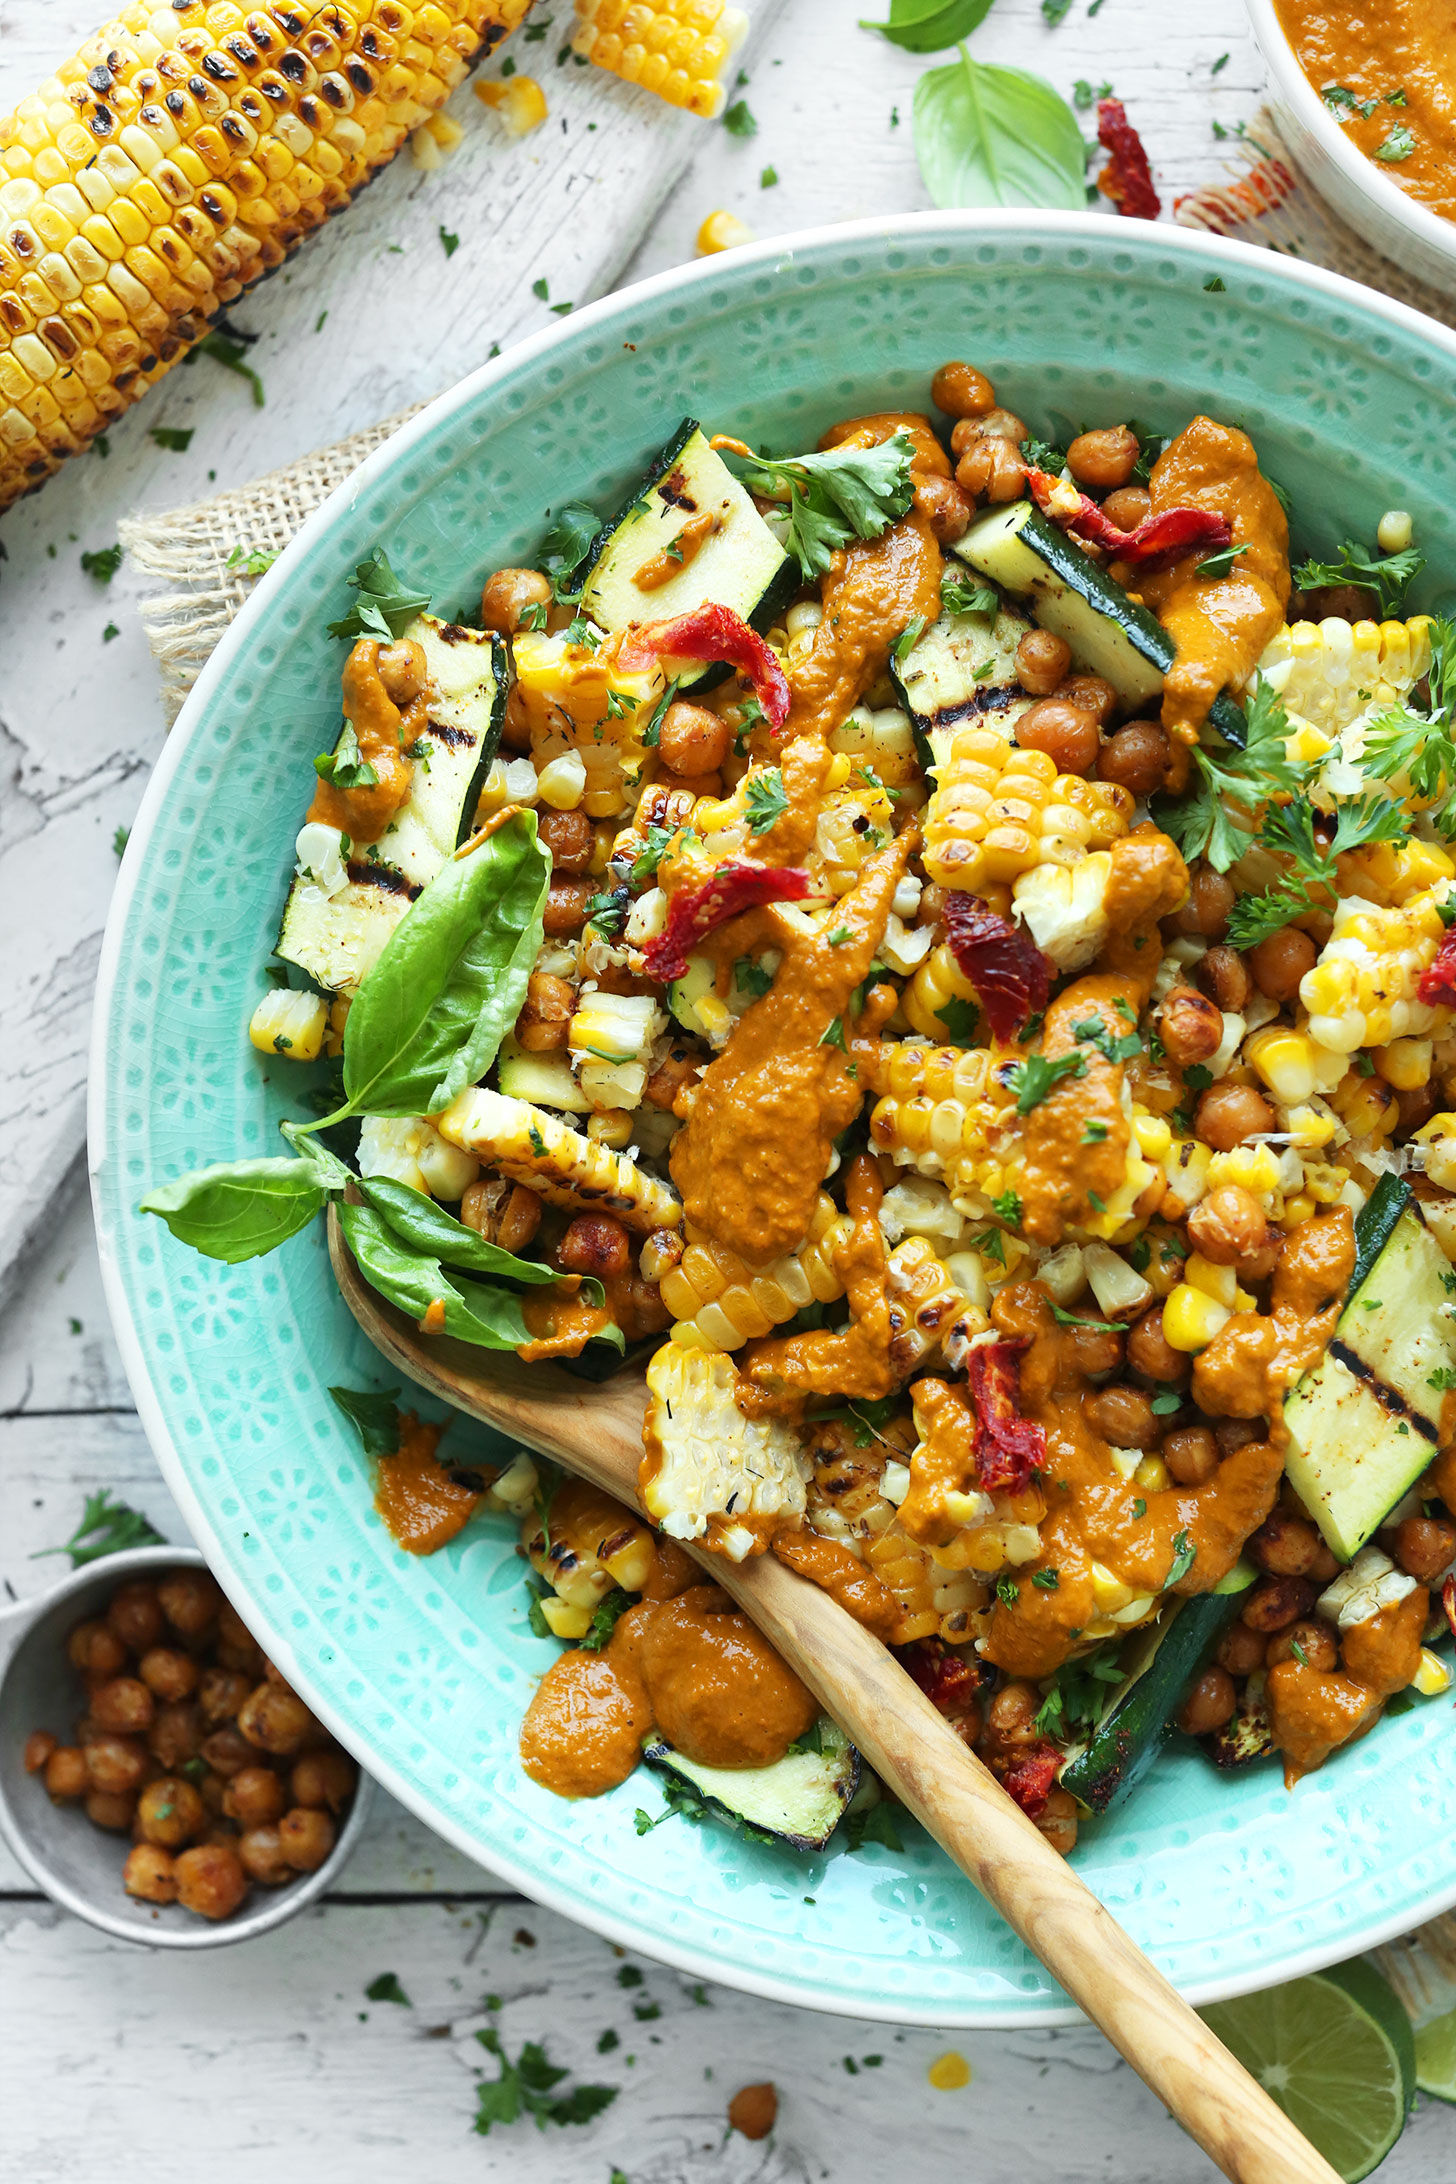 Bowl of our 30-Minute Zucchini & Grilled Corn Salad topped with crispy chickpeas and Sun-Dried Tomato Vinaigrette